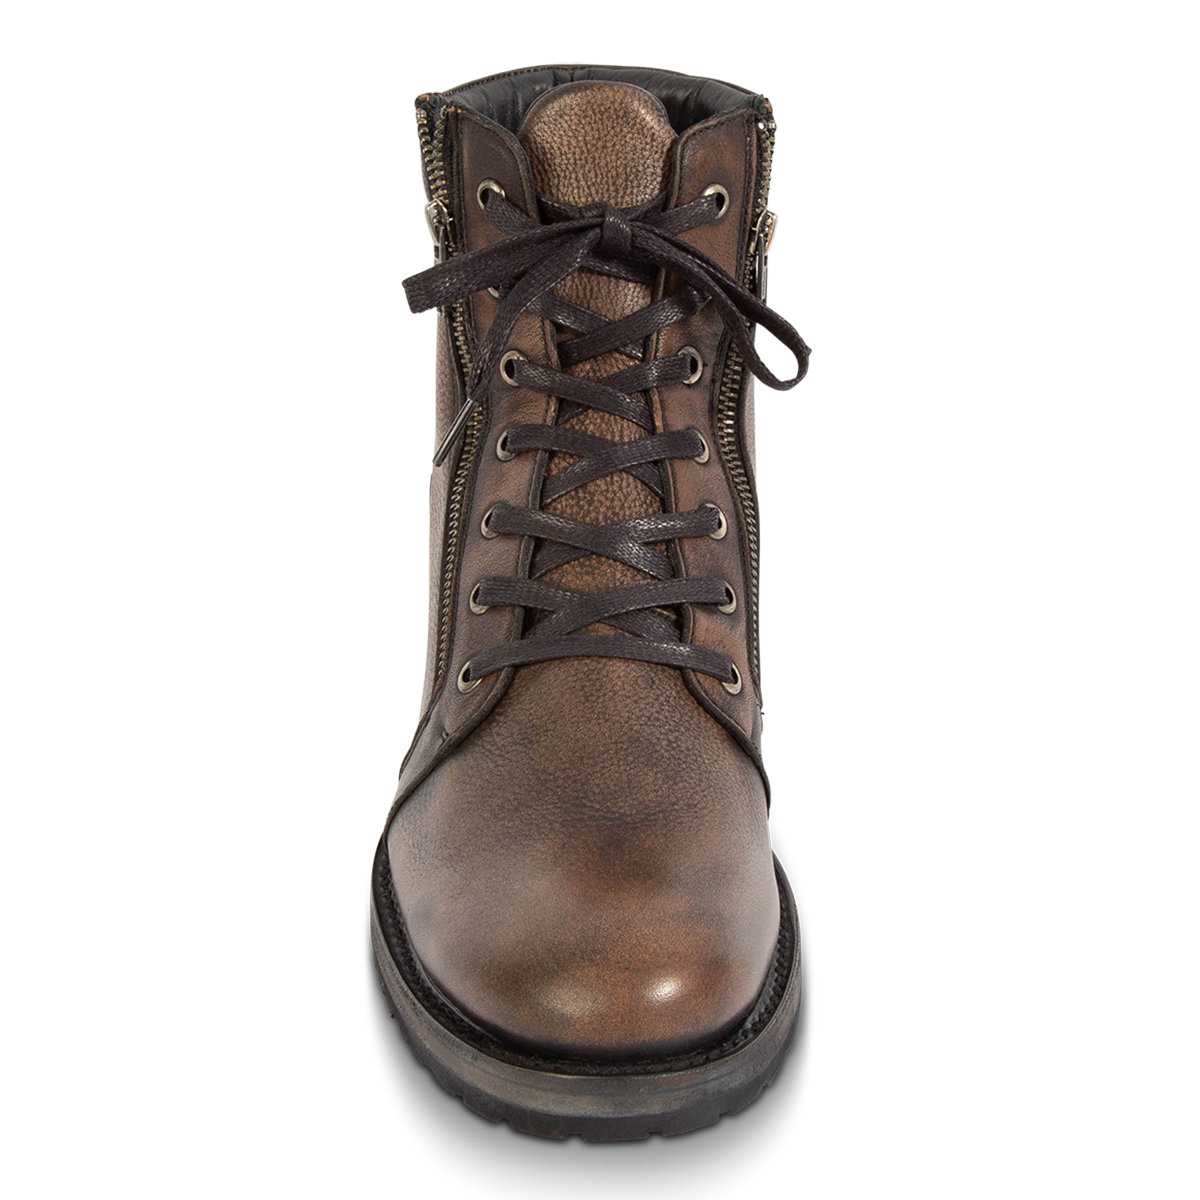 Front view showing symmetrical brass zipper closures and front tie lacing on FREEBIRD men's Chevy black leather boot